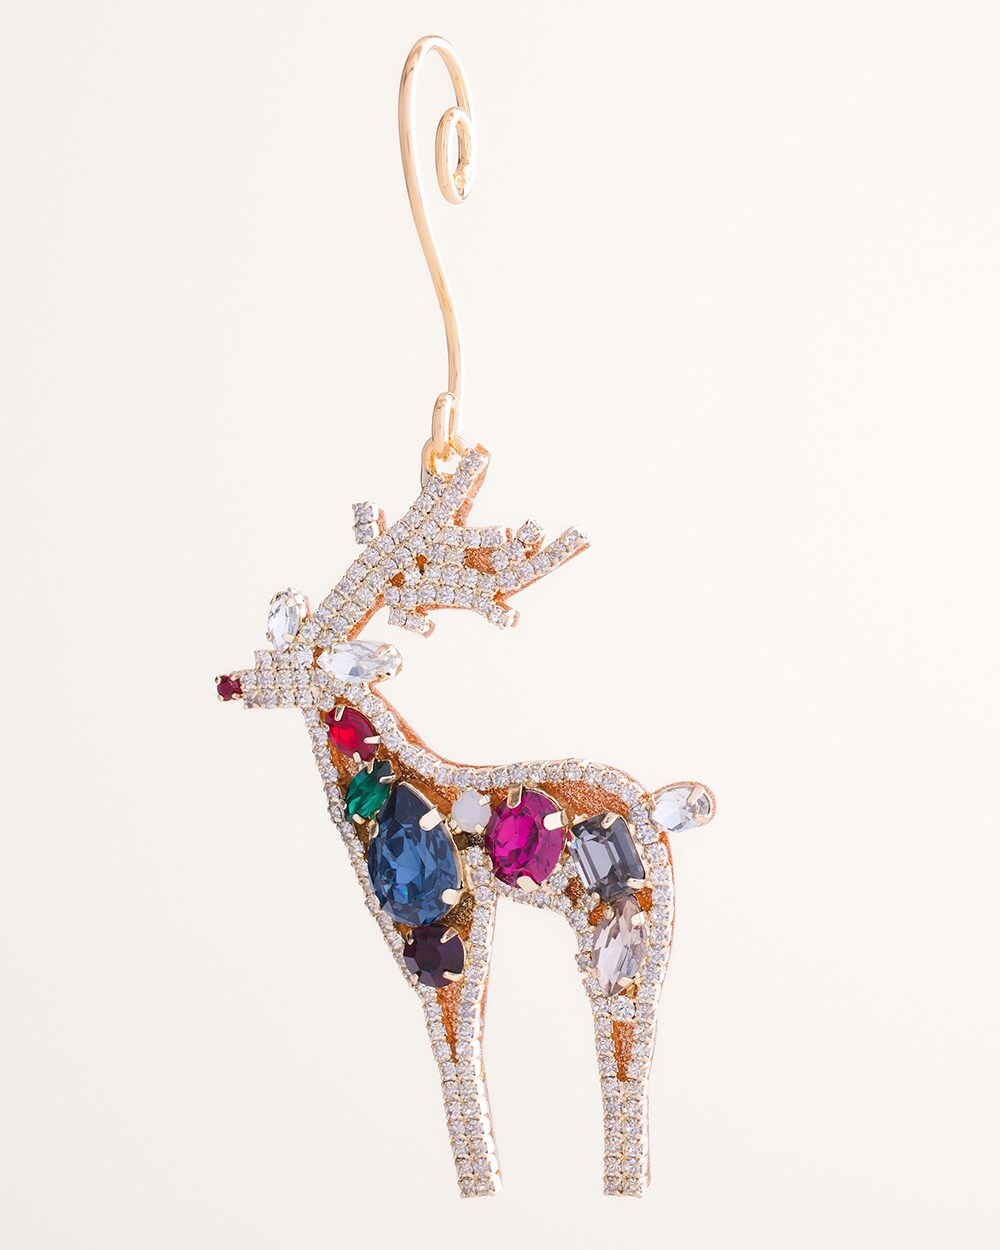 Faceted Simulated Stone Reindeer Ornament